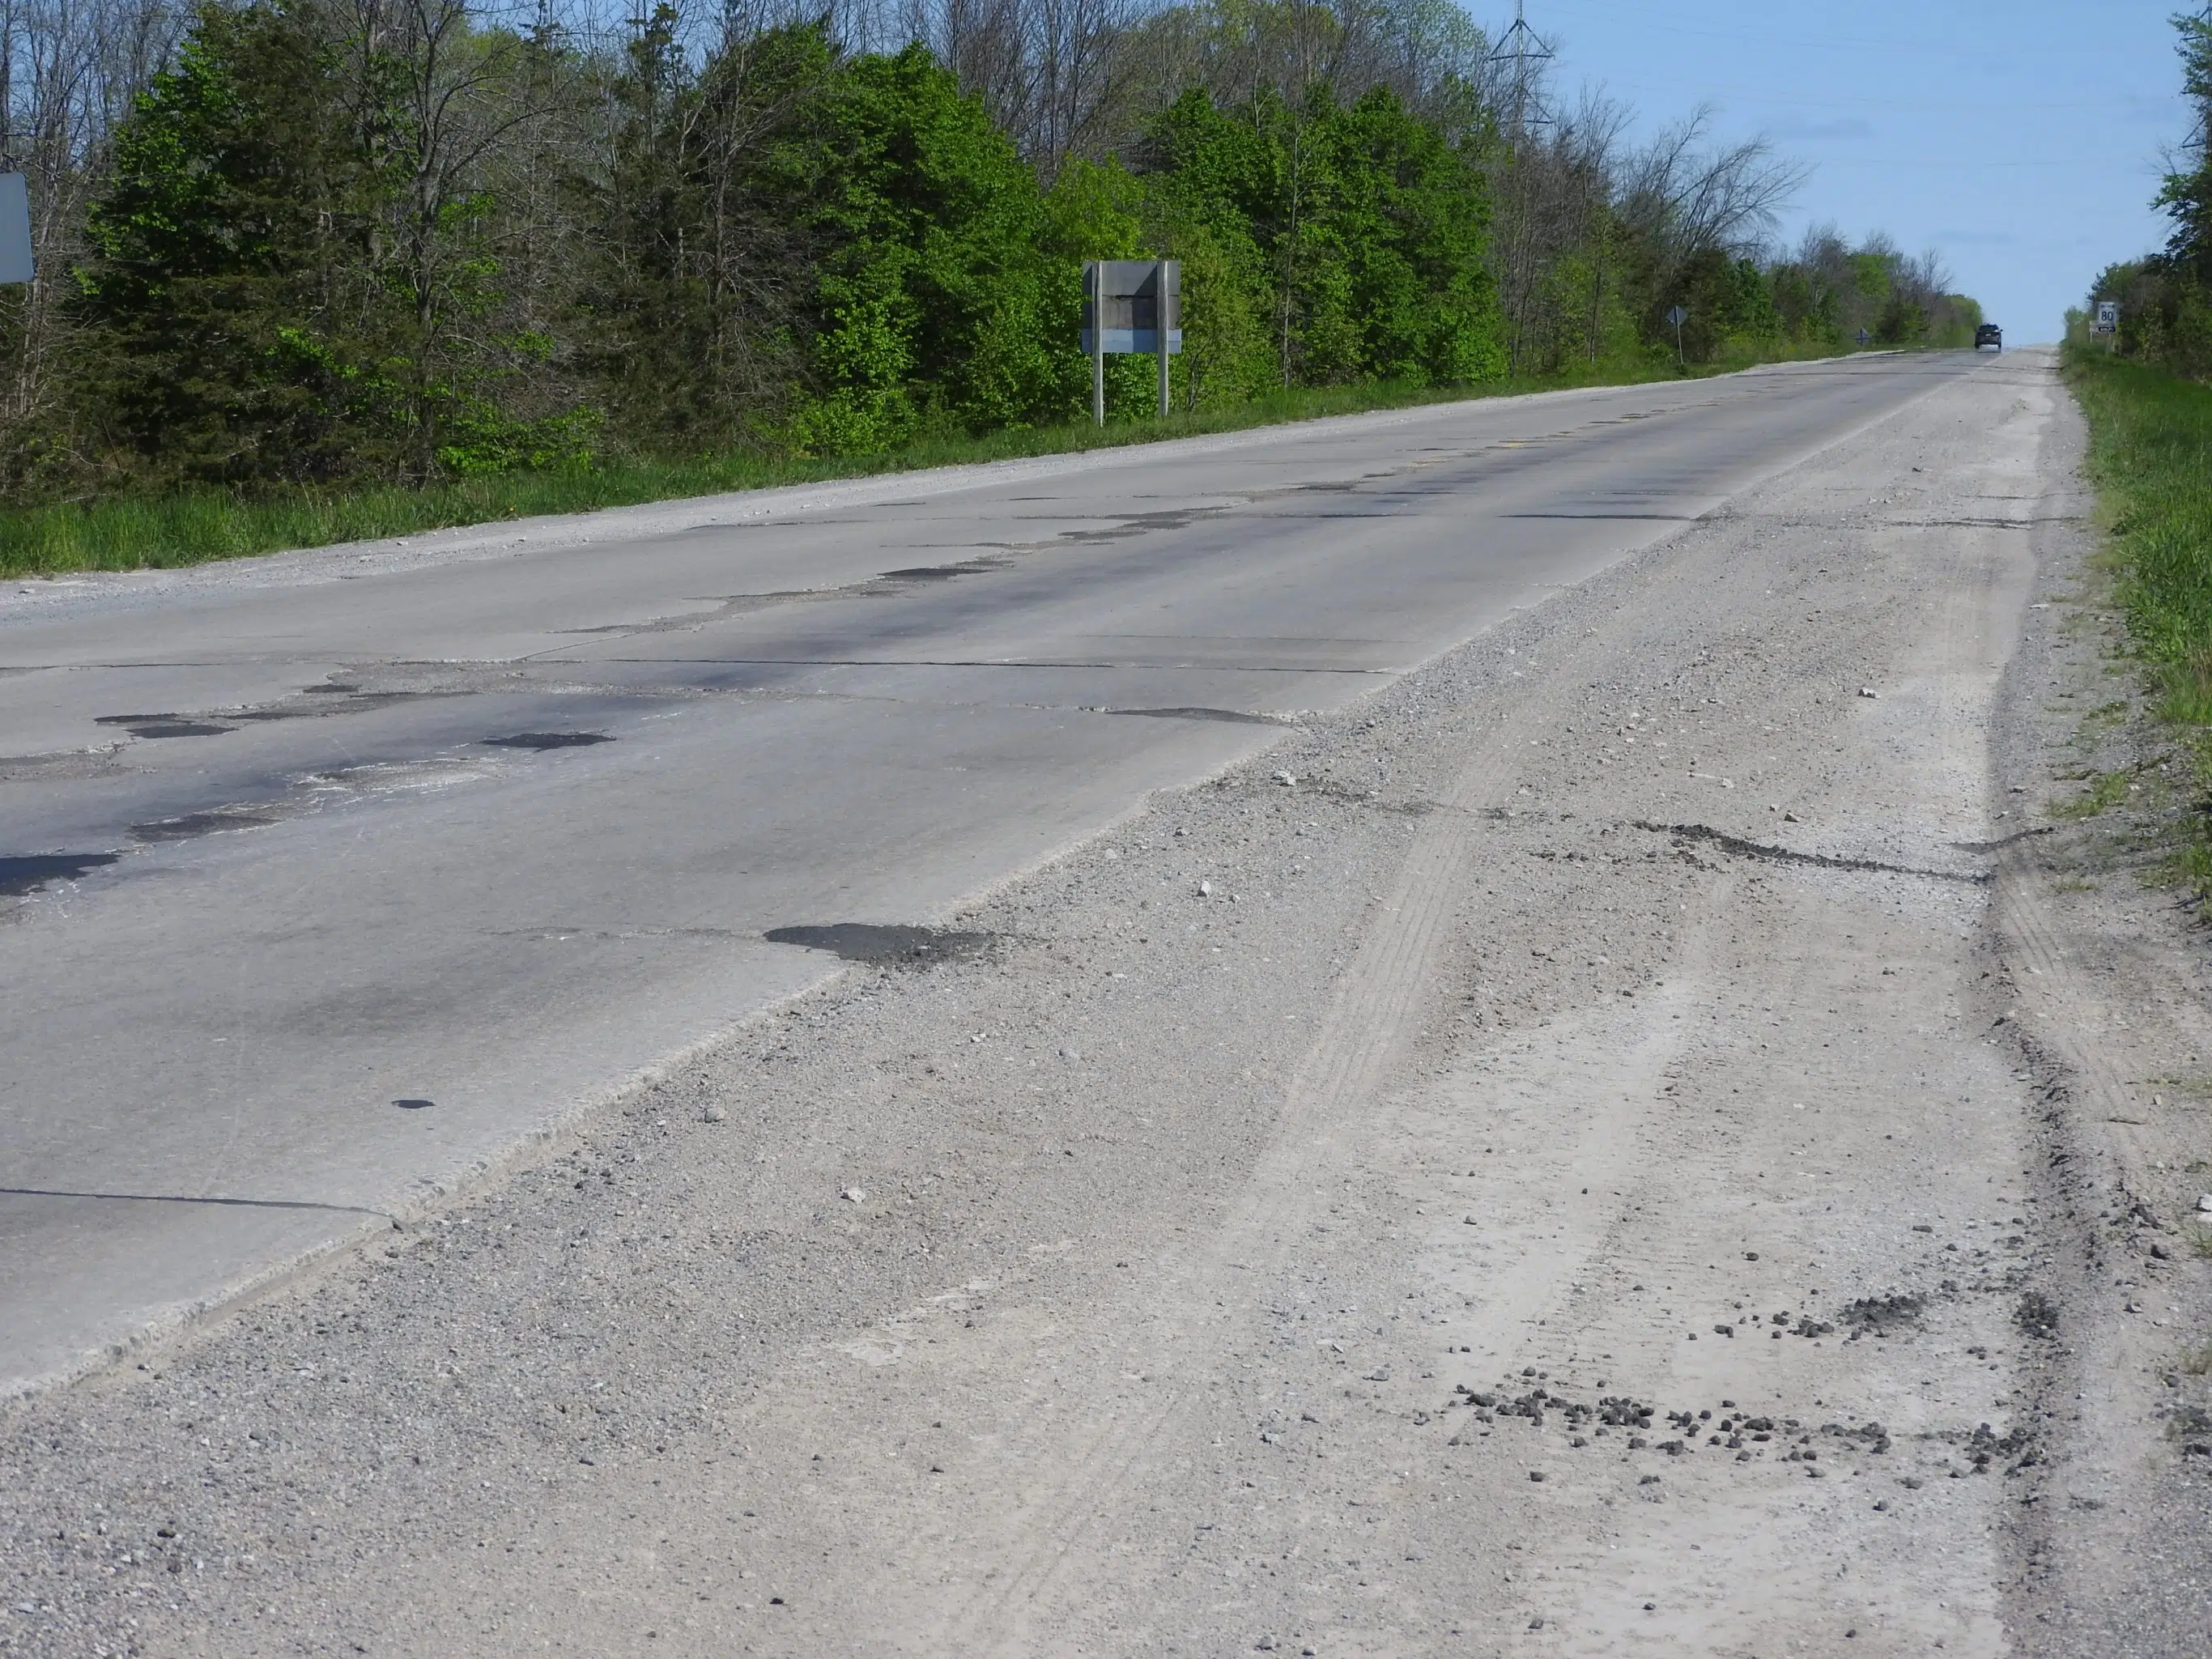 Prince Edward County calls for provincial and federal support for County Road 49